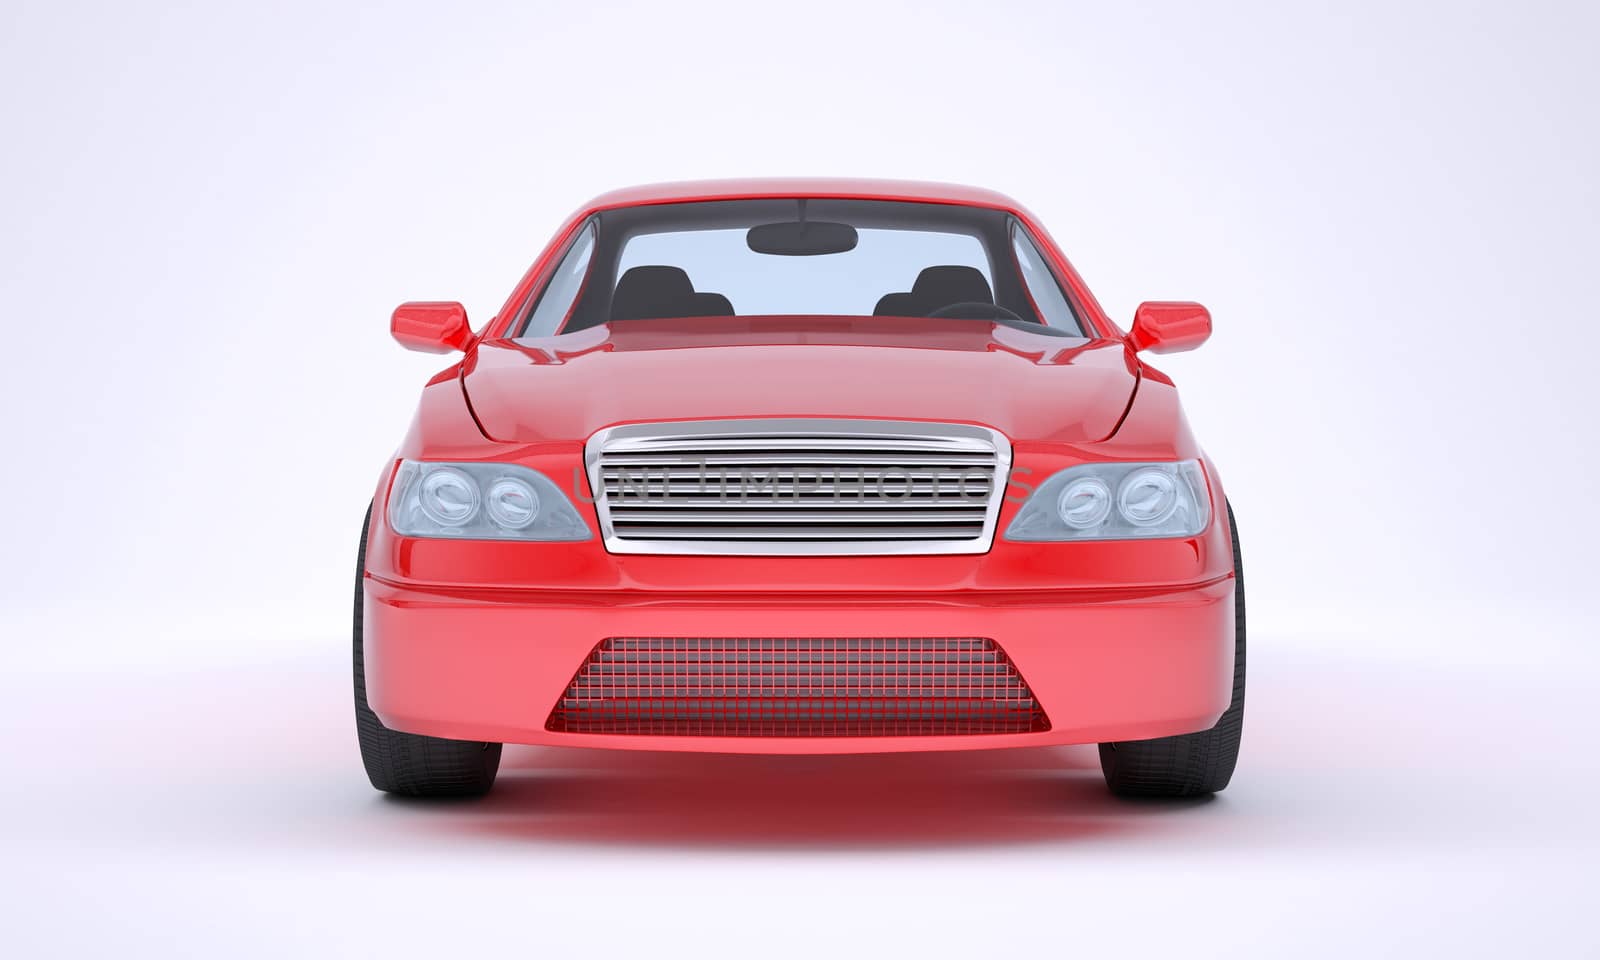 Image of red car on white background, front view